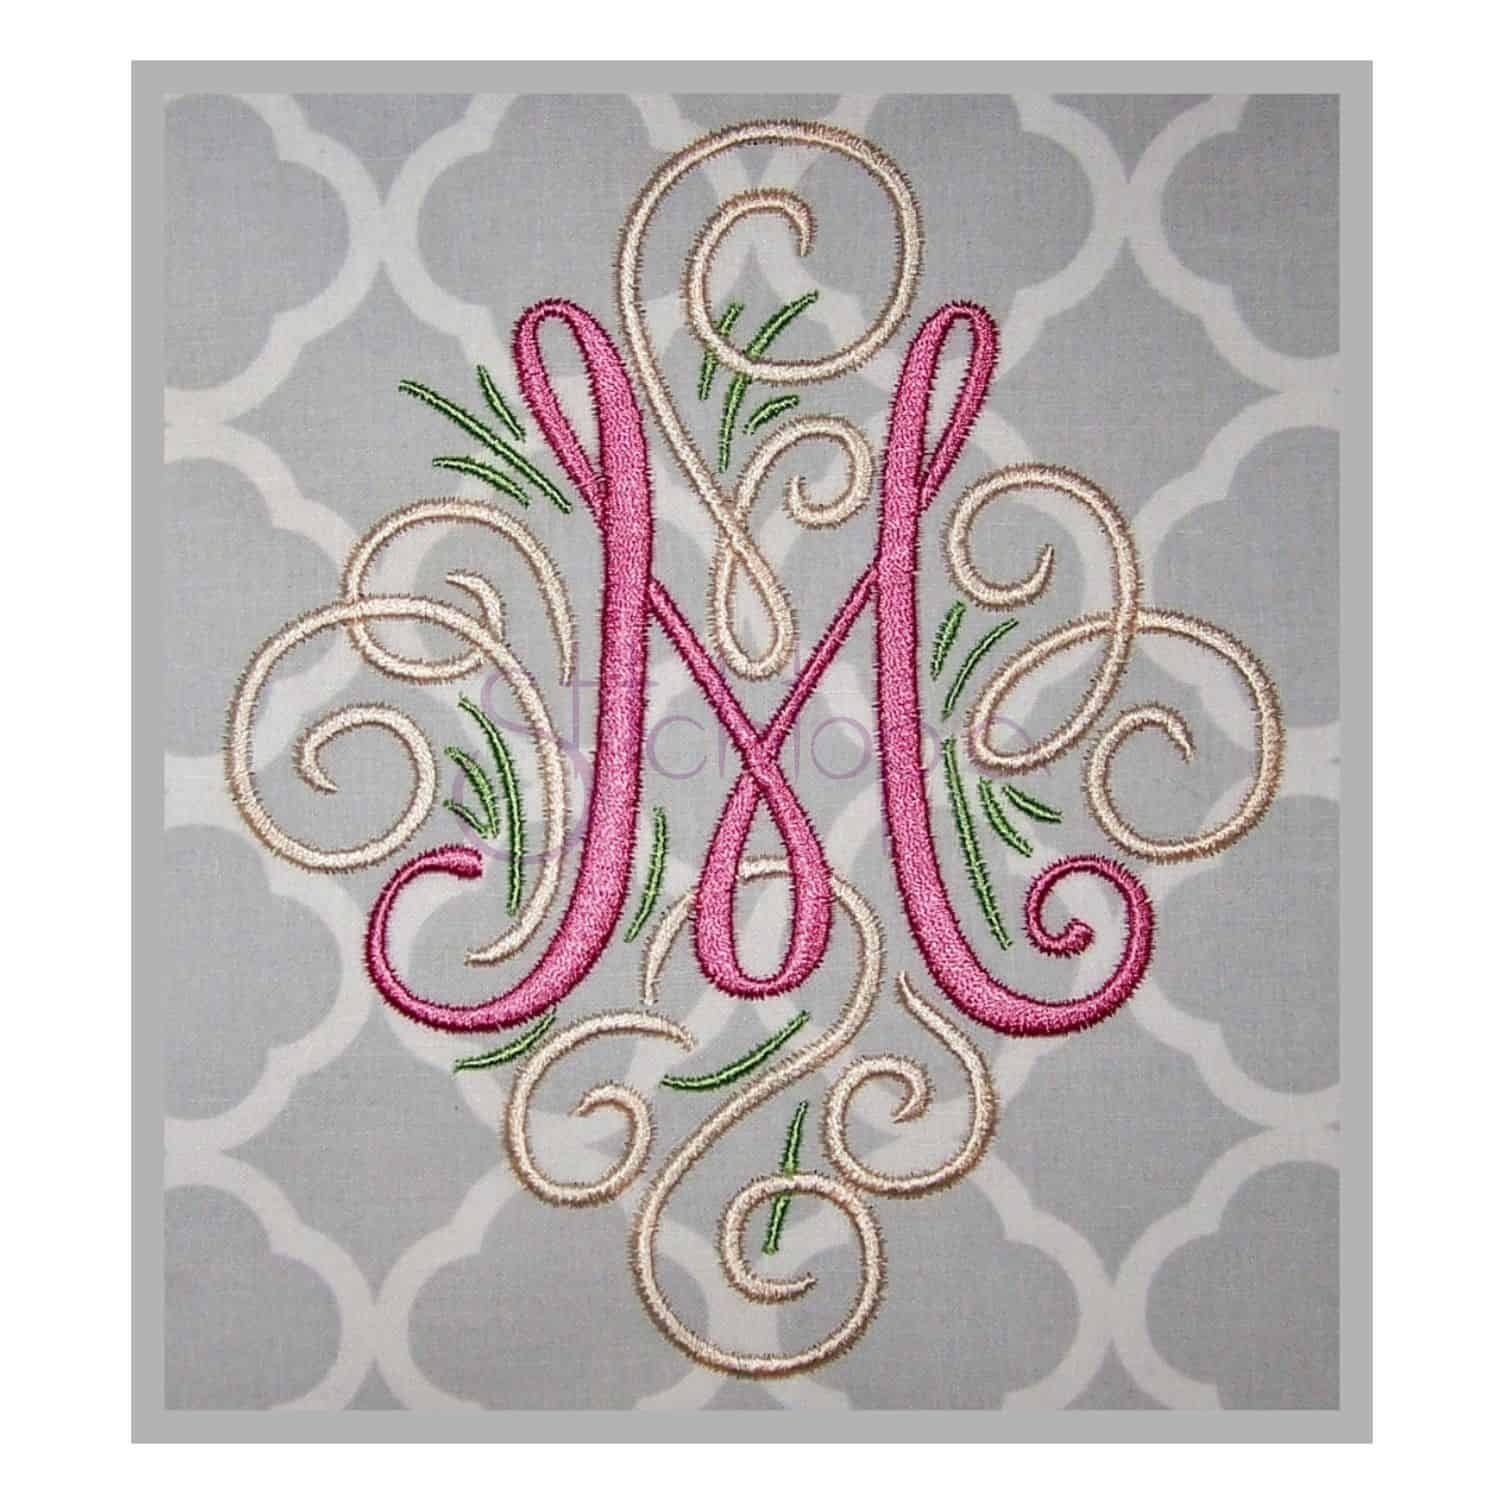 Monogram Font Machine Embroidery Design Monogram Machine Embroidery Fonts  Embroidery Monogram Letter  Embroidery Alphabet Letters